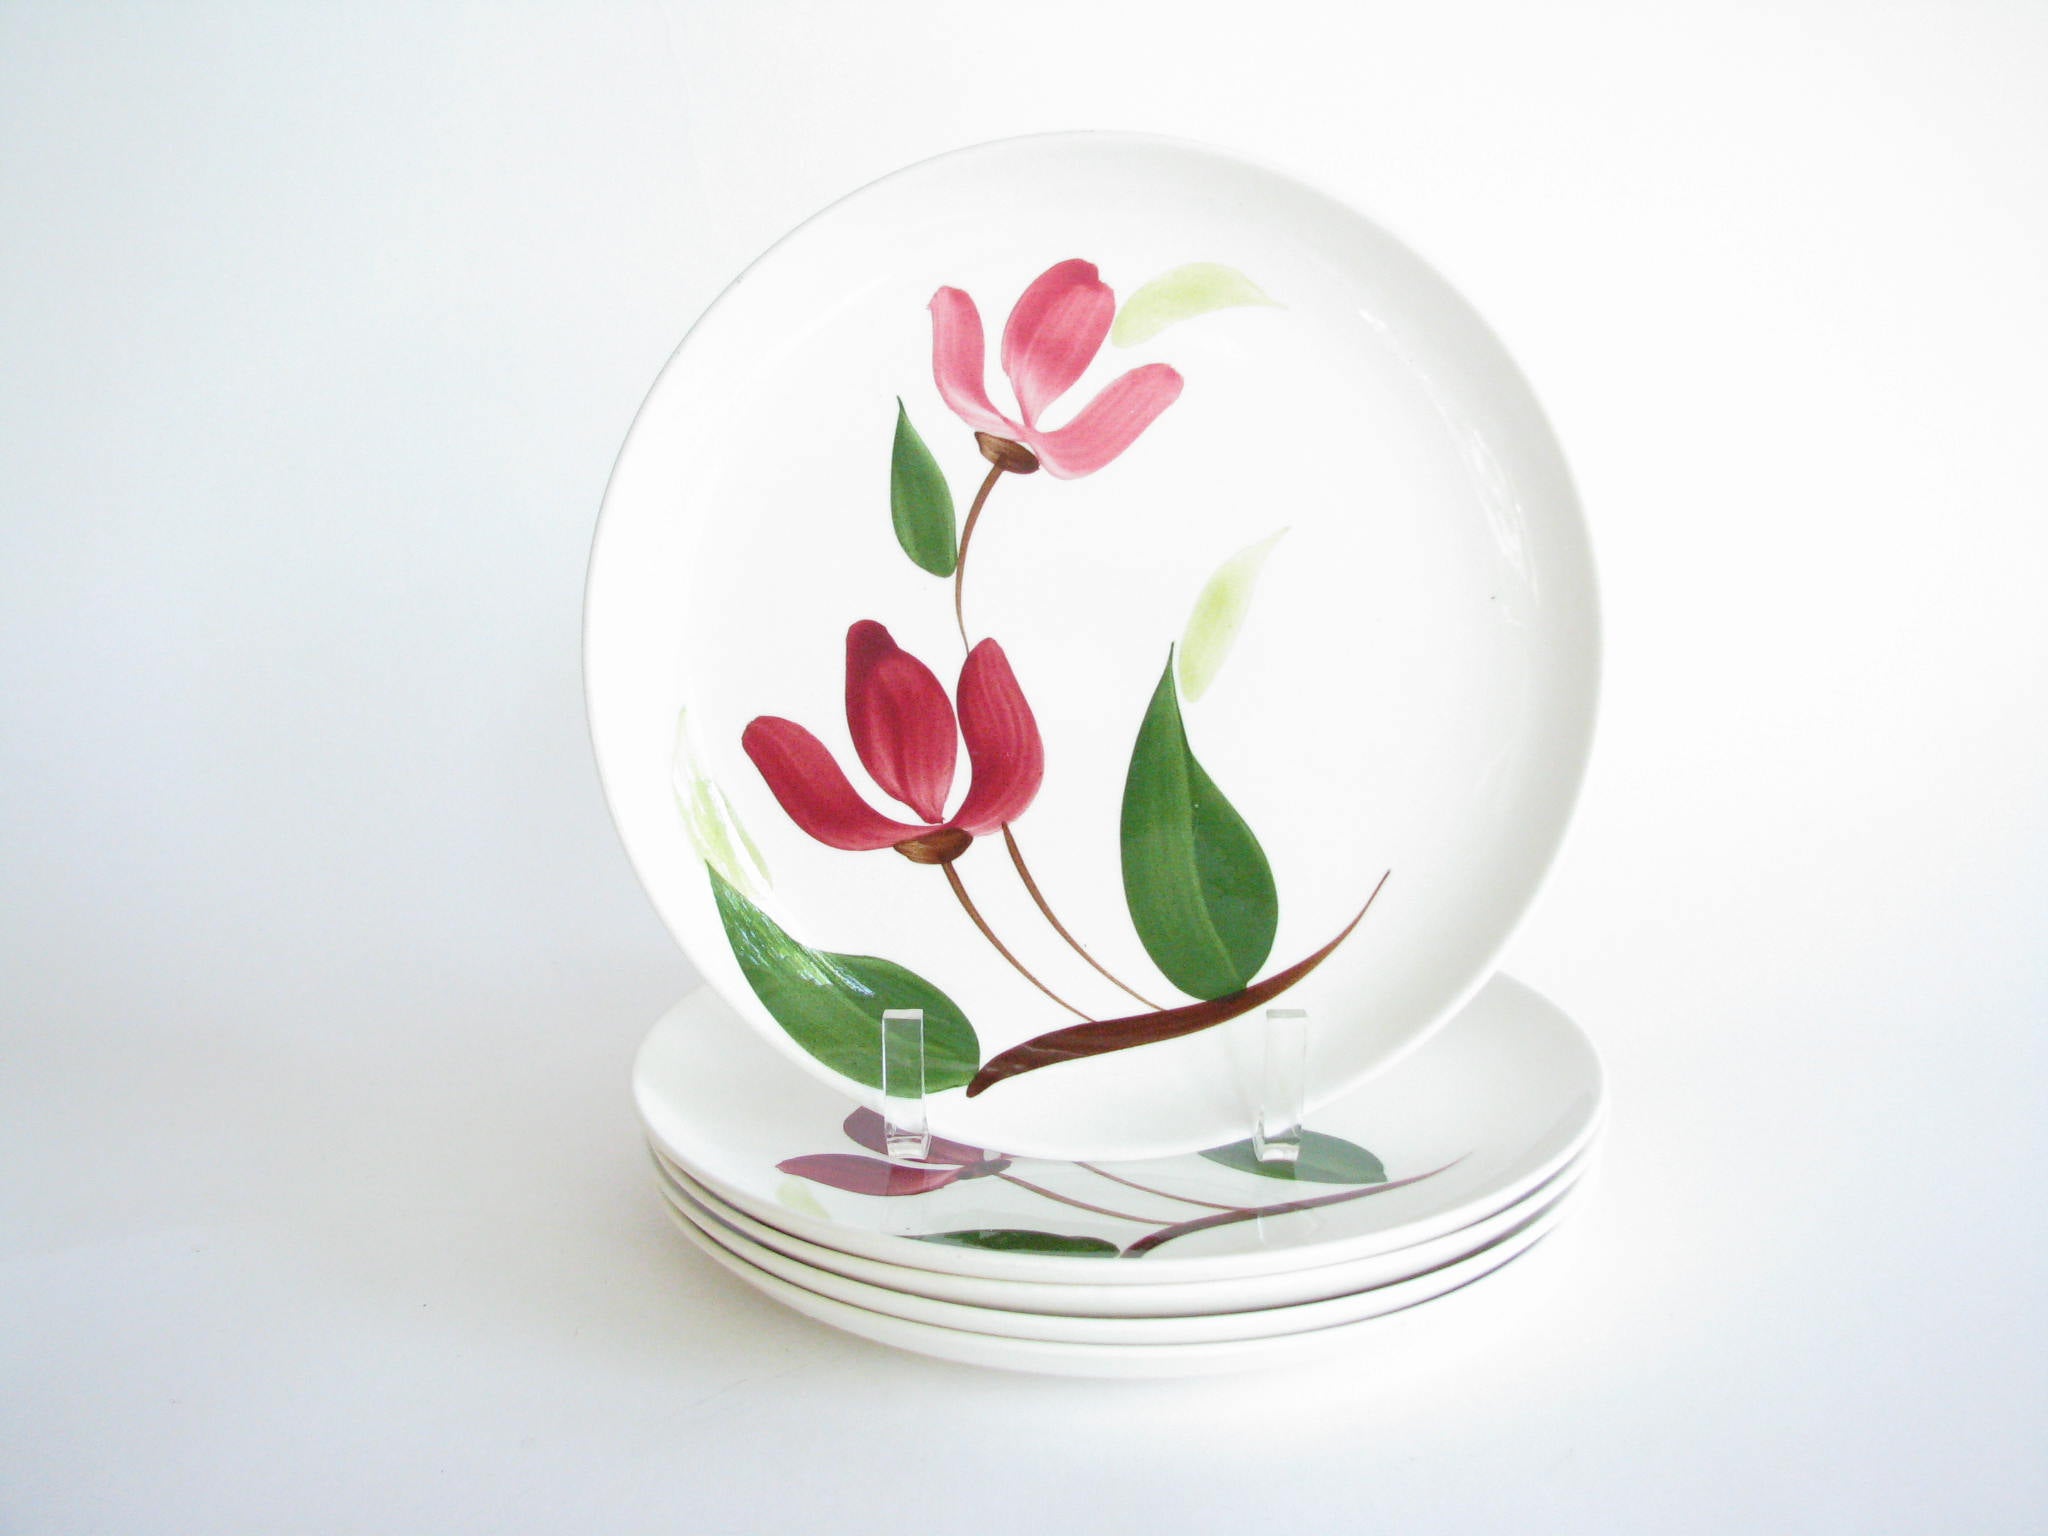 edgebrookhouse - 1950s Stetson Tulip Time Floral Ironstone Dinner or Luncheon Plates - Set of 5